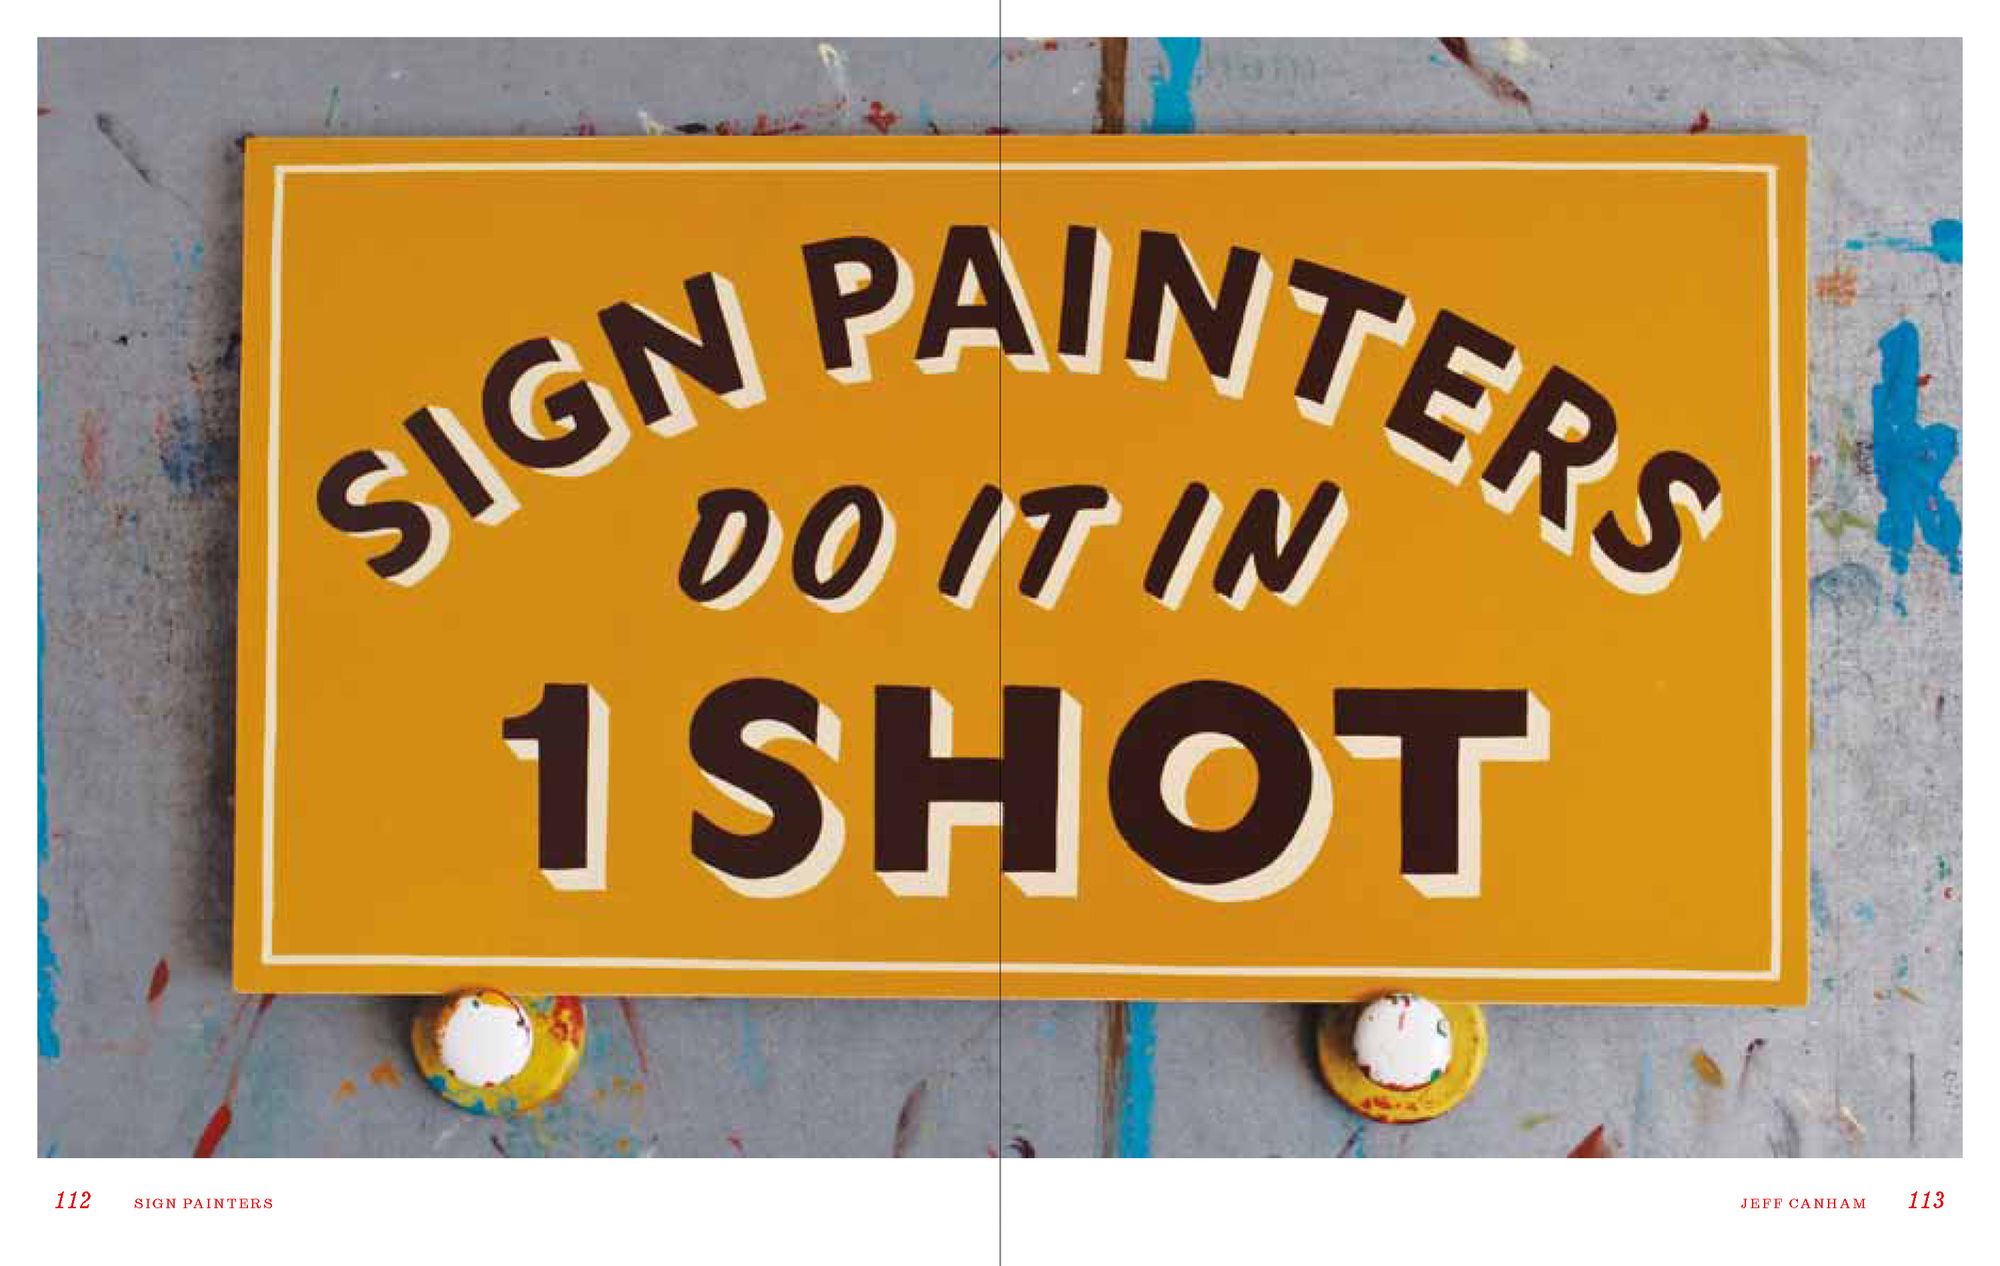 Painted sign reading "Sign Painters do it in 1 Shot"